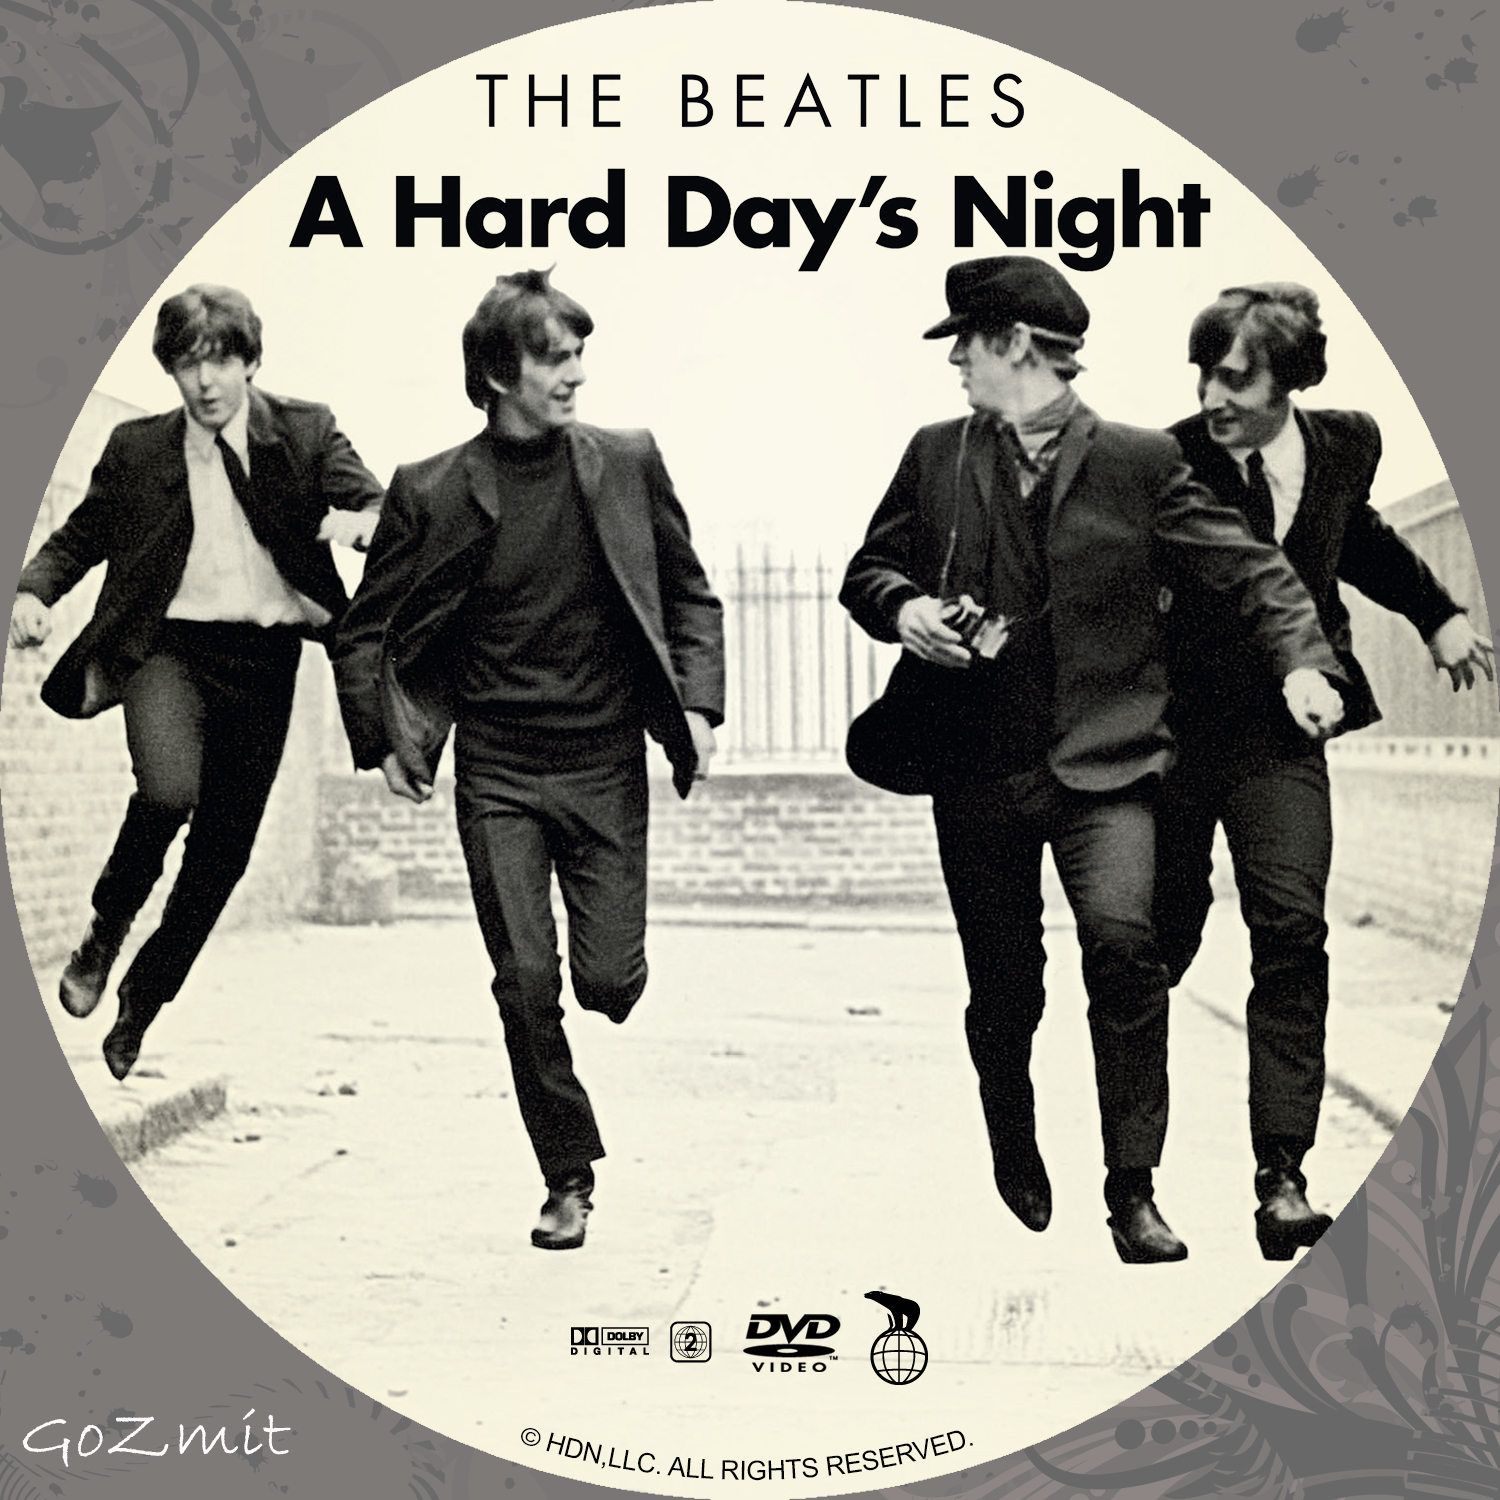 The beatles a hard day s night. Битлз a hard Days Night. Beatles альбом a hard Days. The Beatles a hard Day's Night 1964 альбом. The Beatles a hard Day's Night обложка.